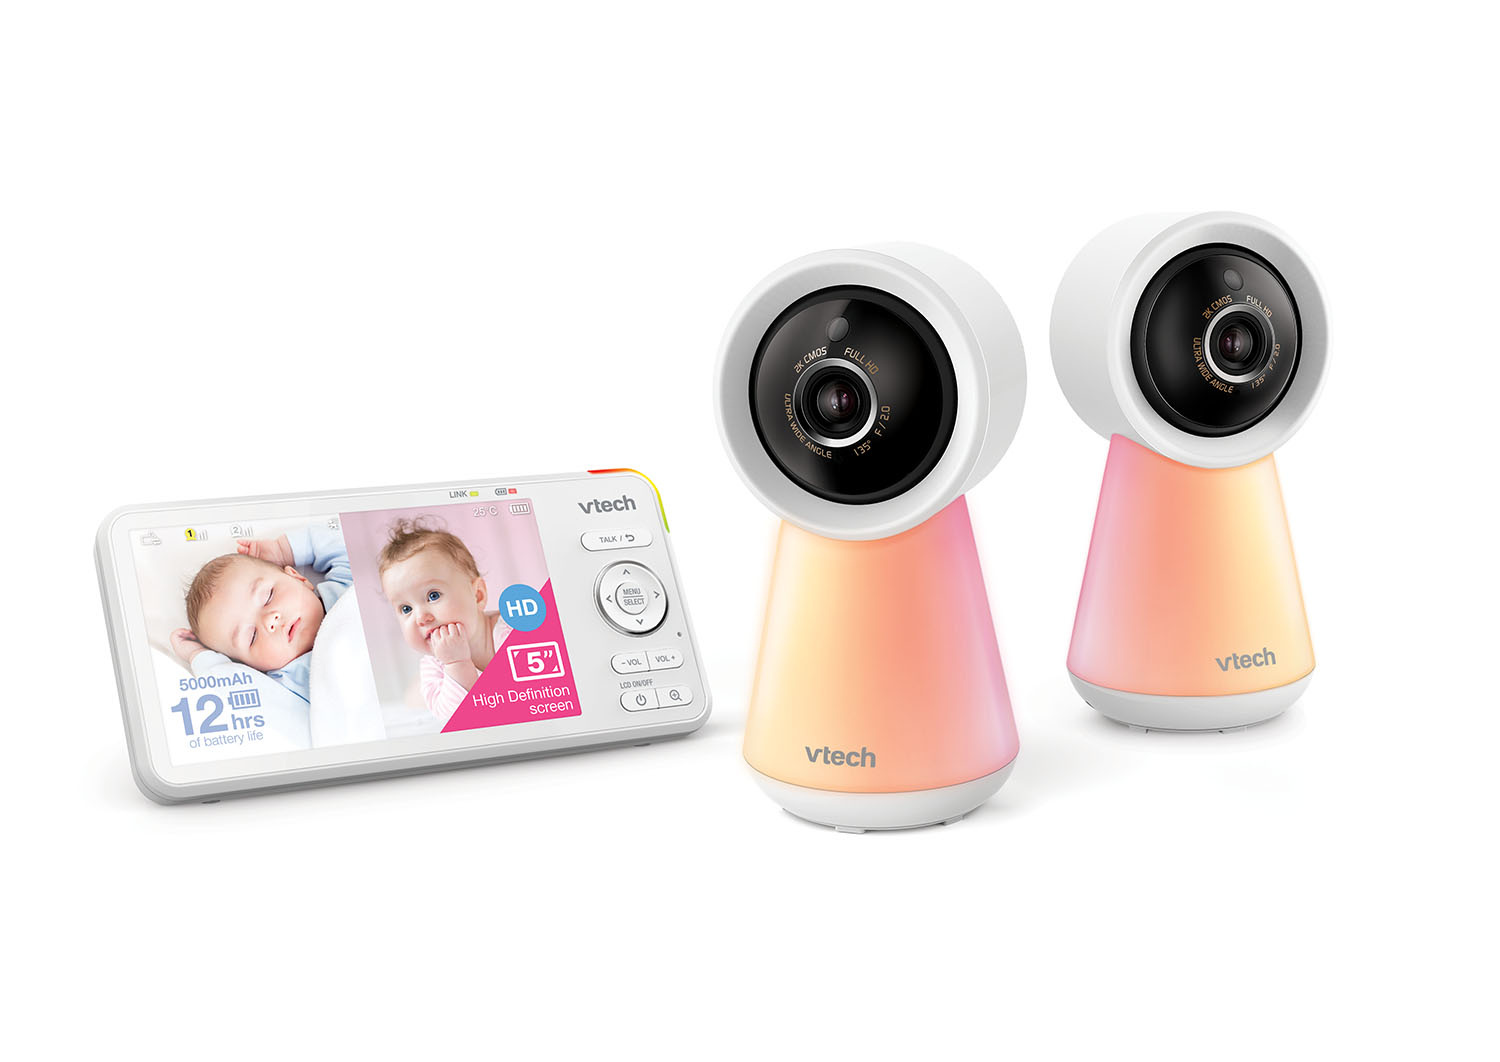 VTech Vtech RM5754HDV2 2 - Camera Smart HD Video Monitor With Remote Access